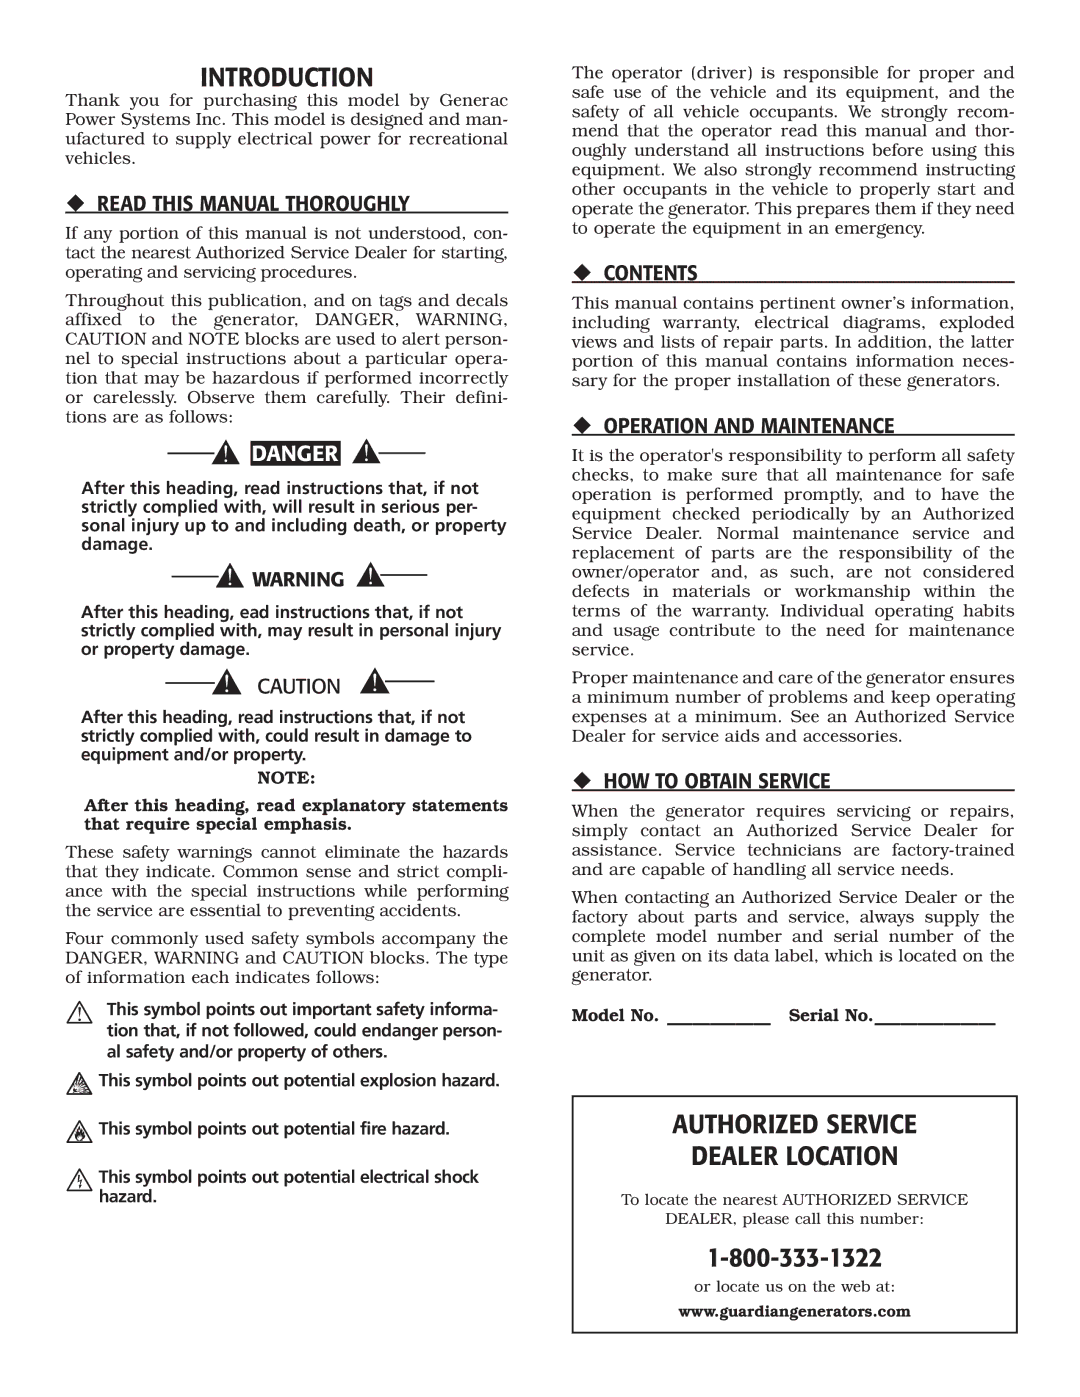 Generac Power Systems 004709-0 owner manual Introduction, Authorized Service Dealer Location 